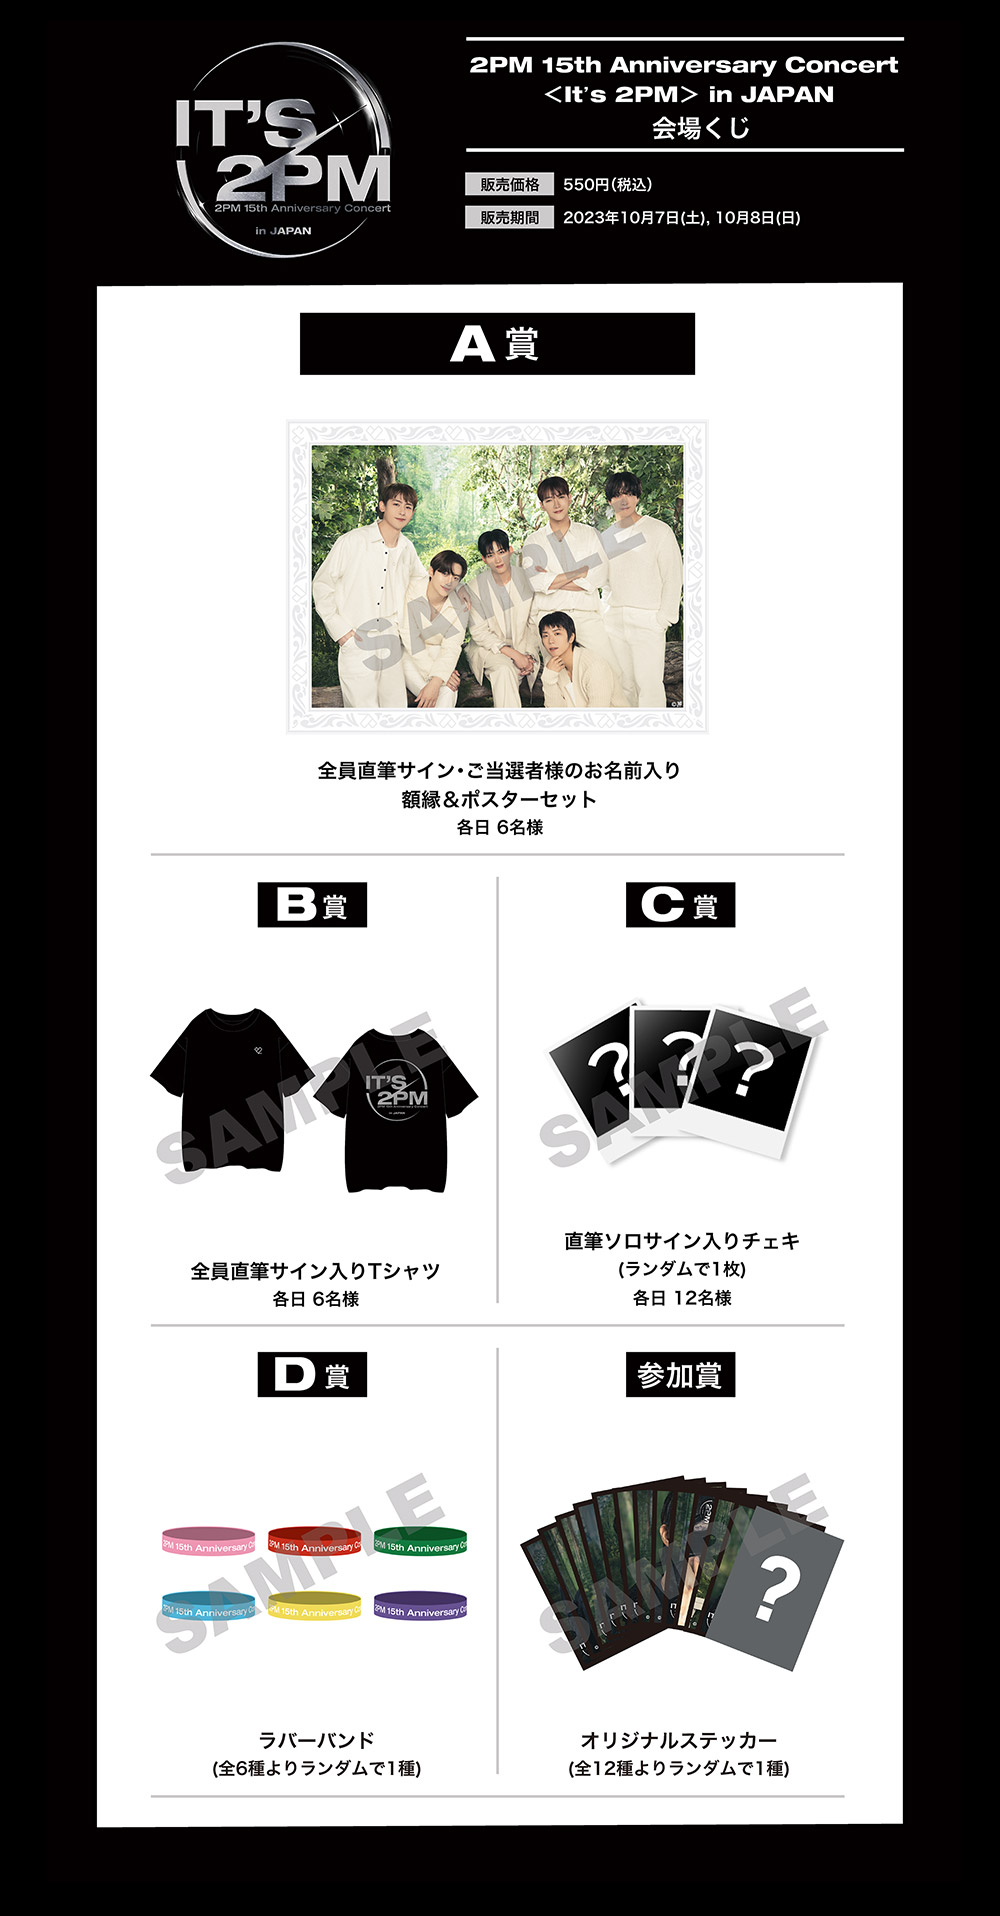 2PM 15th Anniversary Concert ＜It's 2PM＞ in JAPAN Special Site